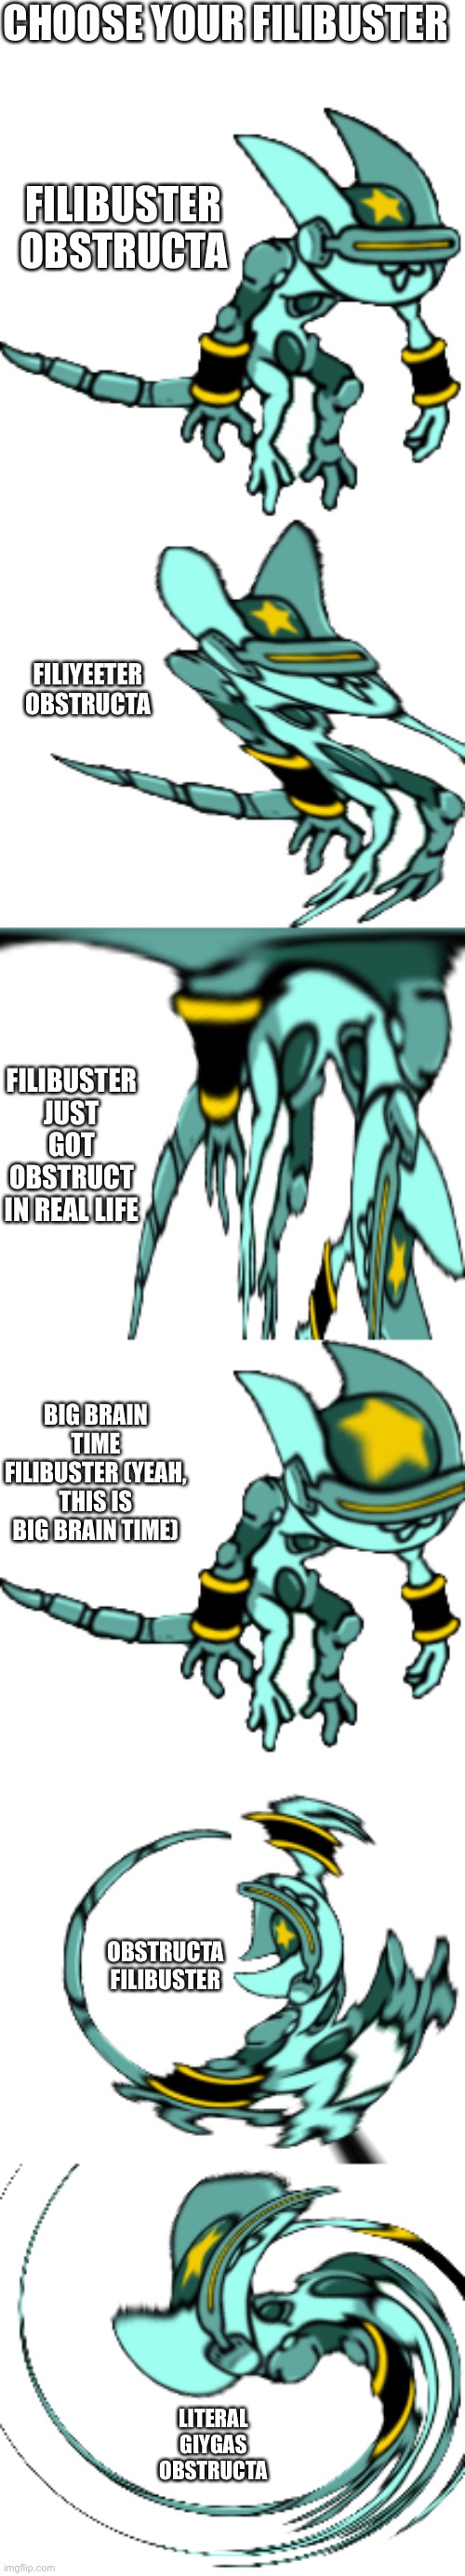 Choose your Filibuster! | CHOOSE YOUR FILIBUSTER; FILIBUSTER OBSTRUCTA; FILIYEETER OBSTRUCTA; FILIBUSTER JUST GOT OBSTRUCT IN REAL LIFE; BIG BRAIN TIME FILIBUSTER (YEAH, THIS IS BIG BRAIN TIME); OBSTRUCTA FILIBUSTER; LITERAL GIYGAS OBSTRUCTA | image tagged in memes,funny,cats,reference,yeah this is big brain time,cursed image | made w/ Imgflip meme maker